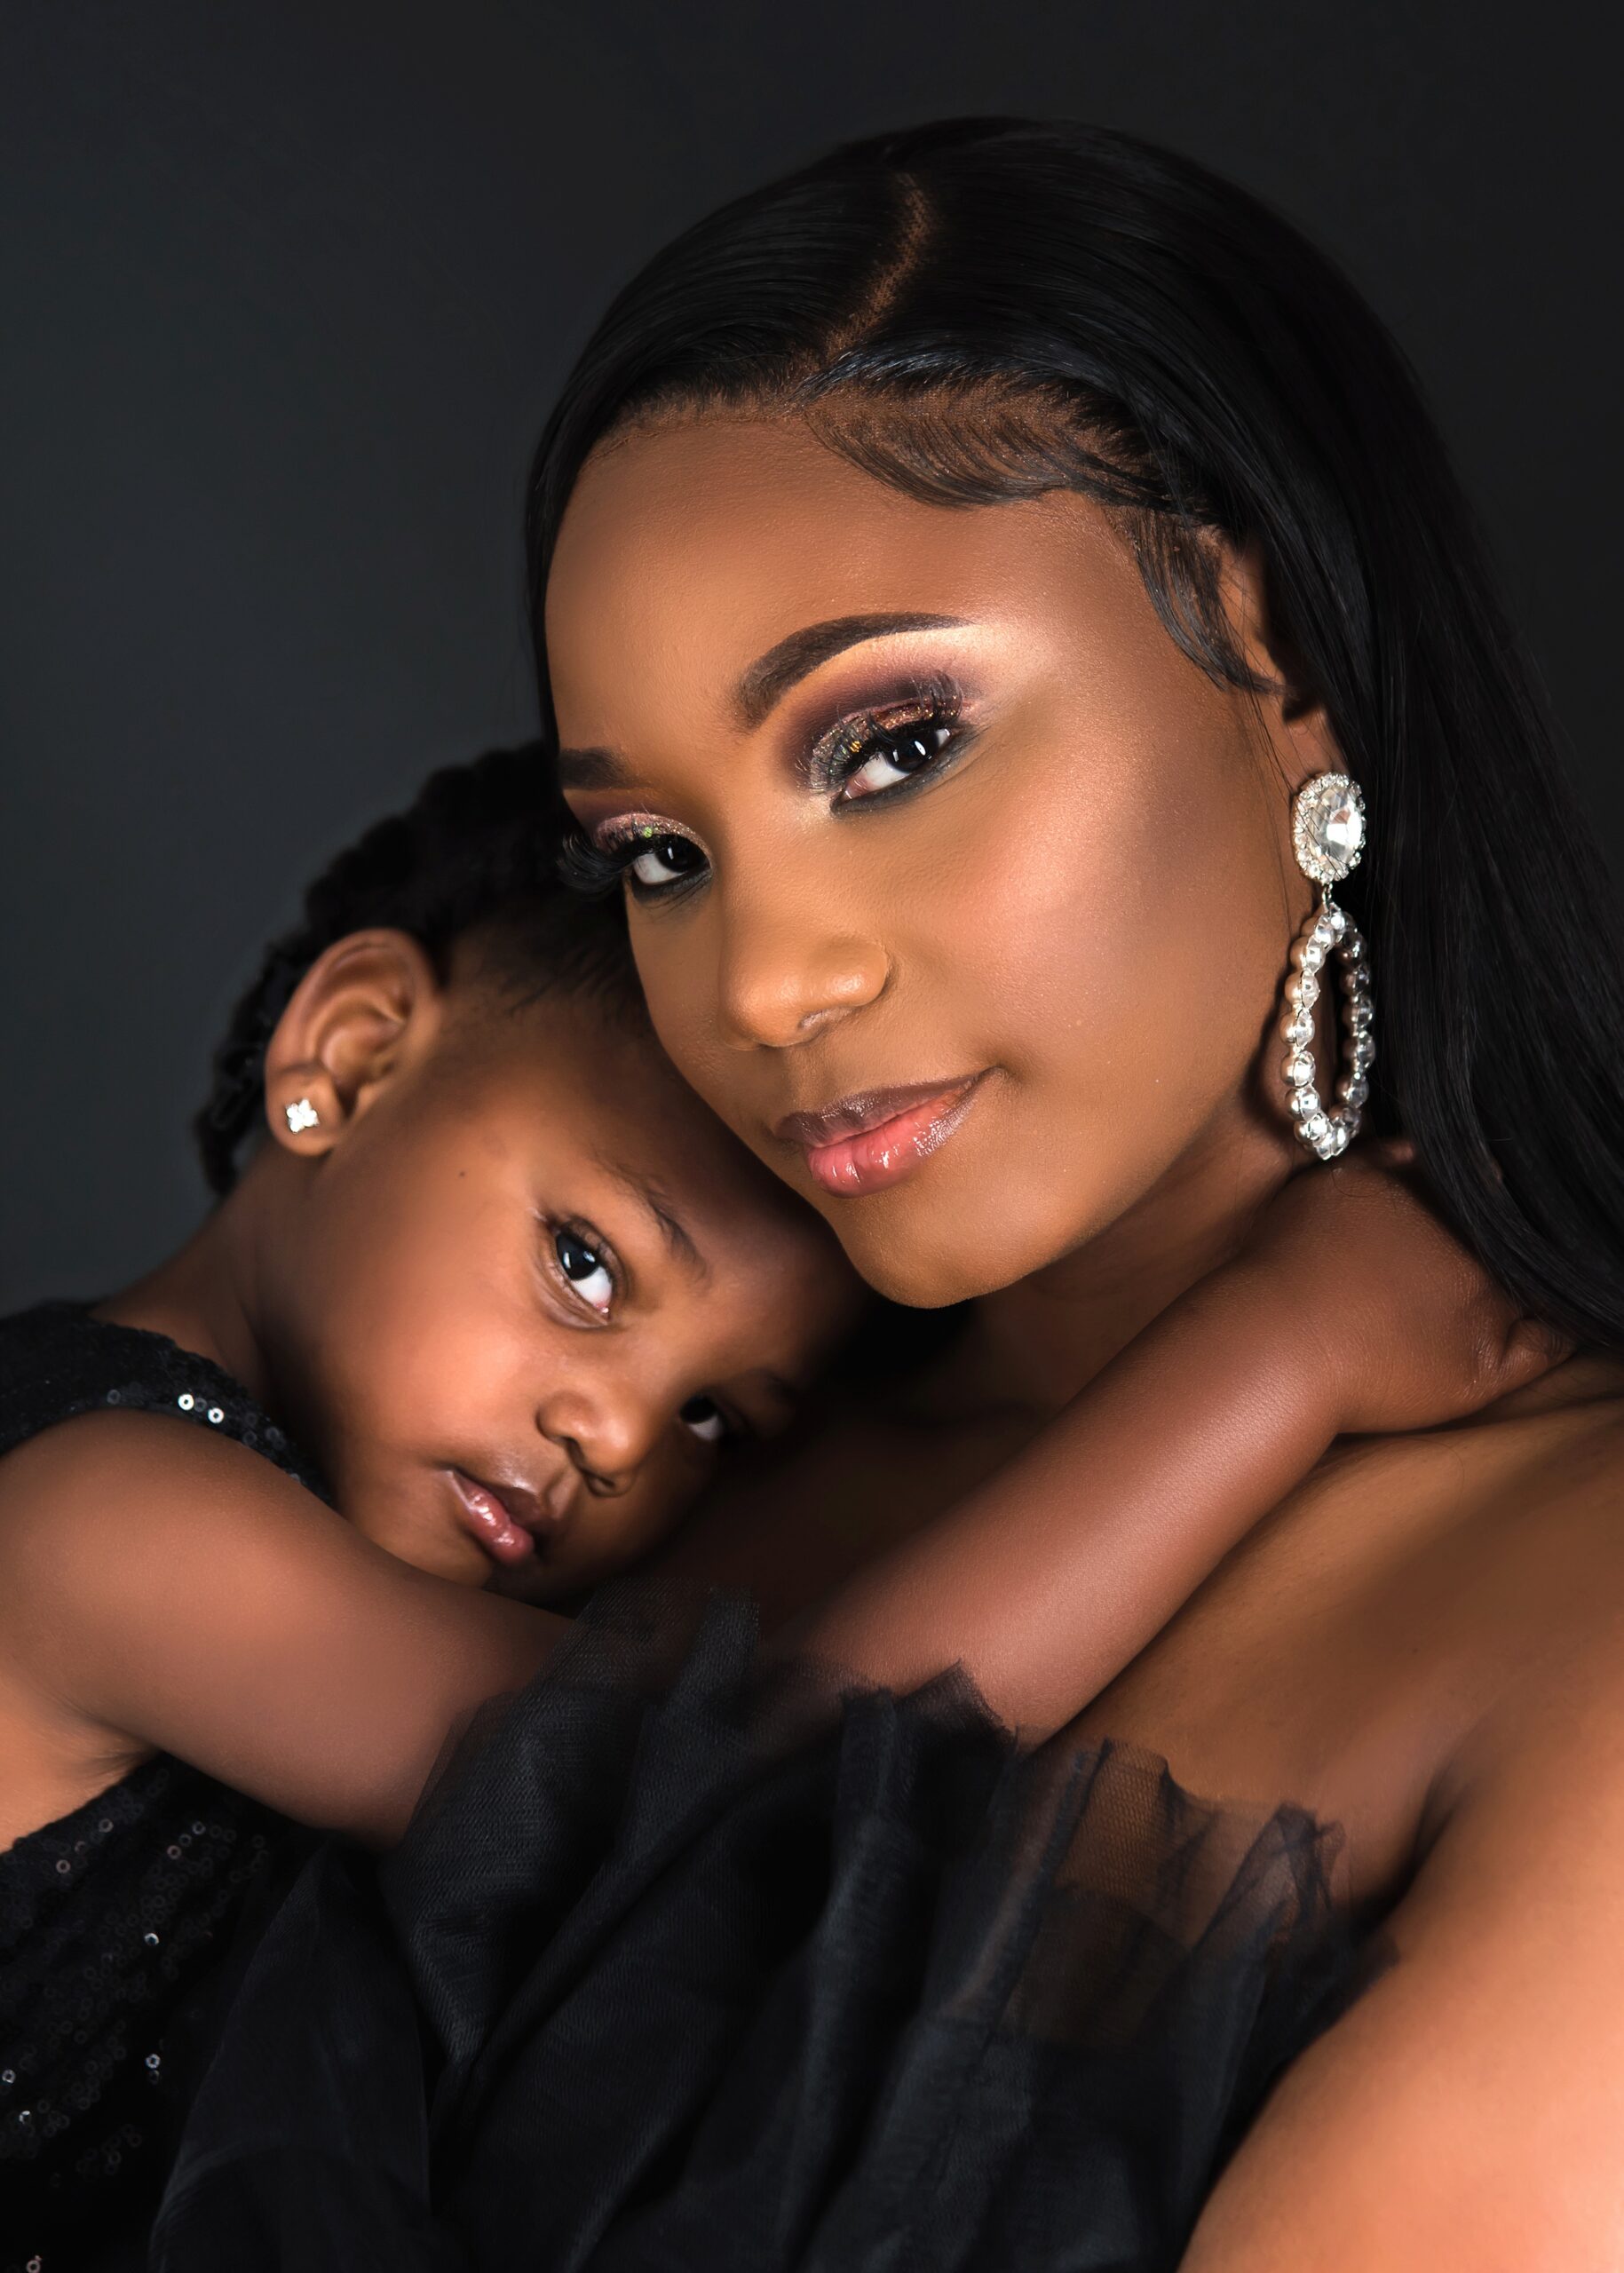 A happy mother in a black dress snuggles her toddler daughter in a studio